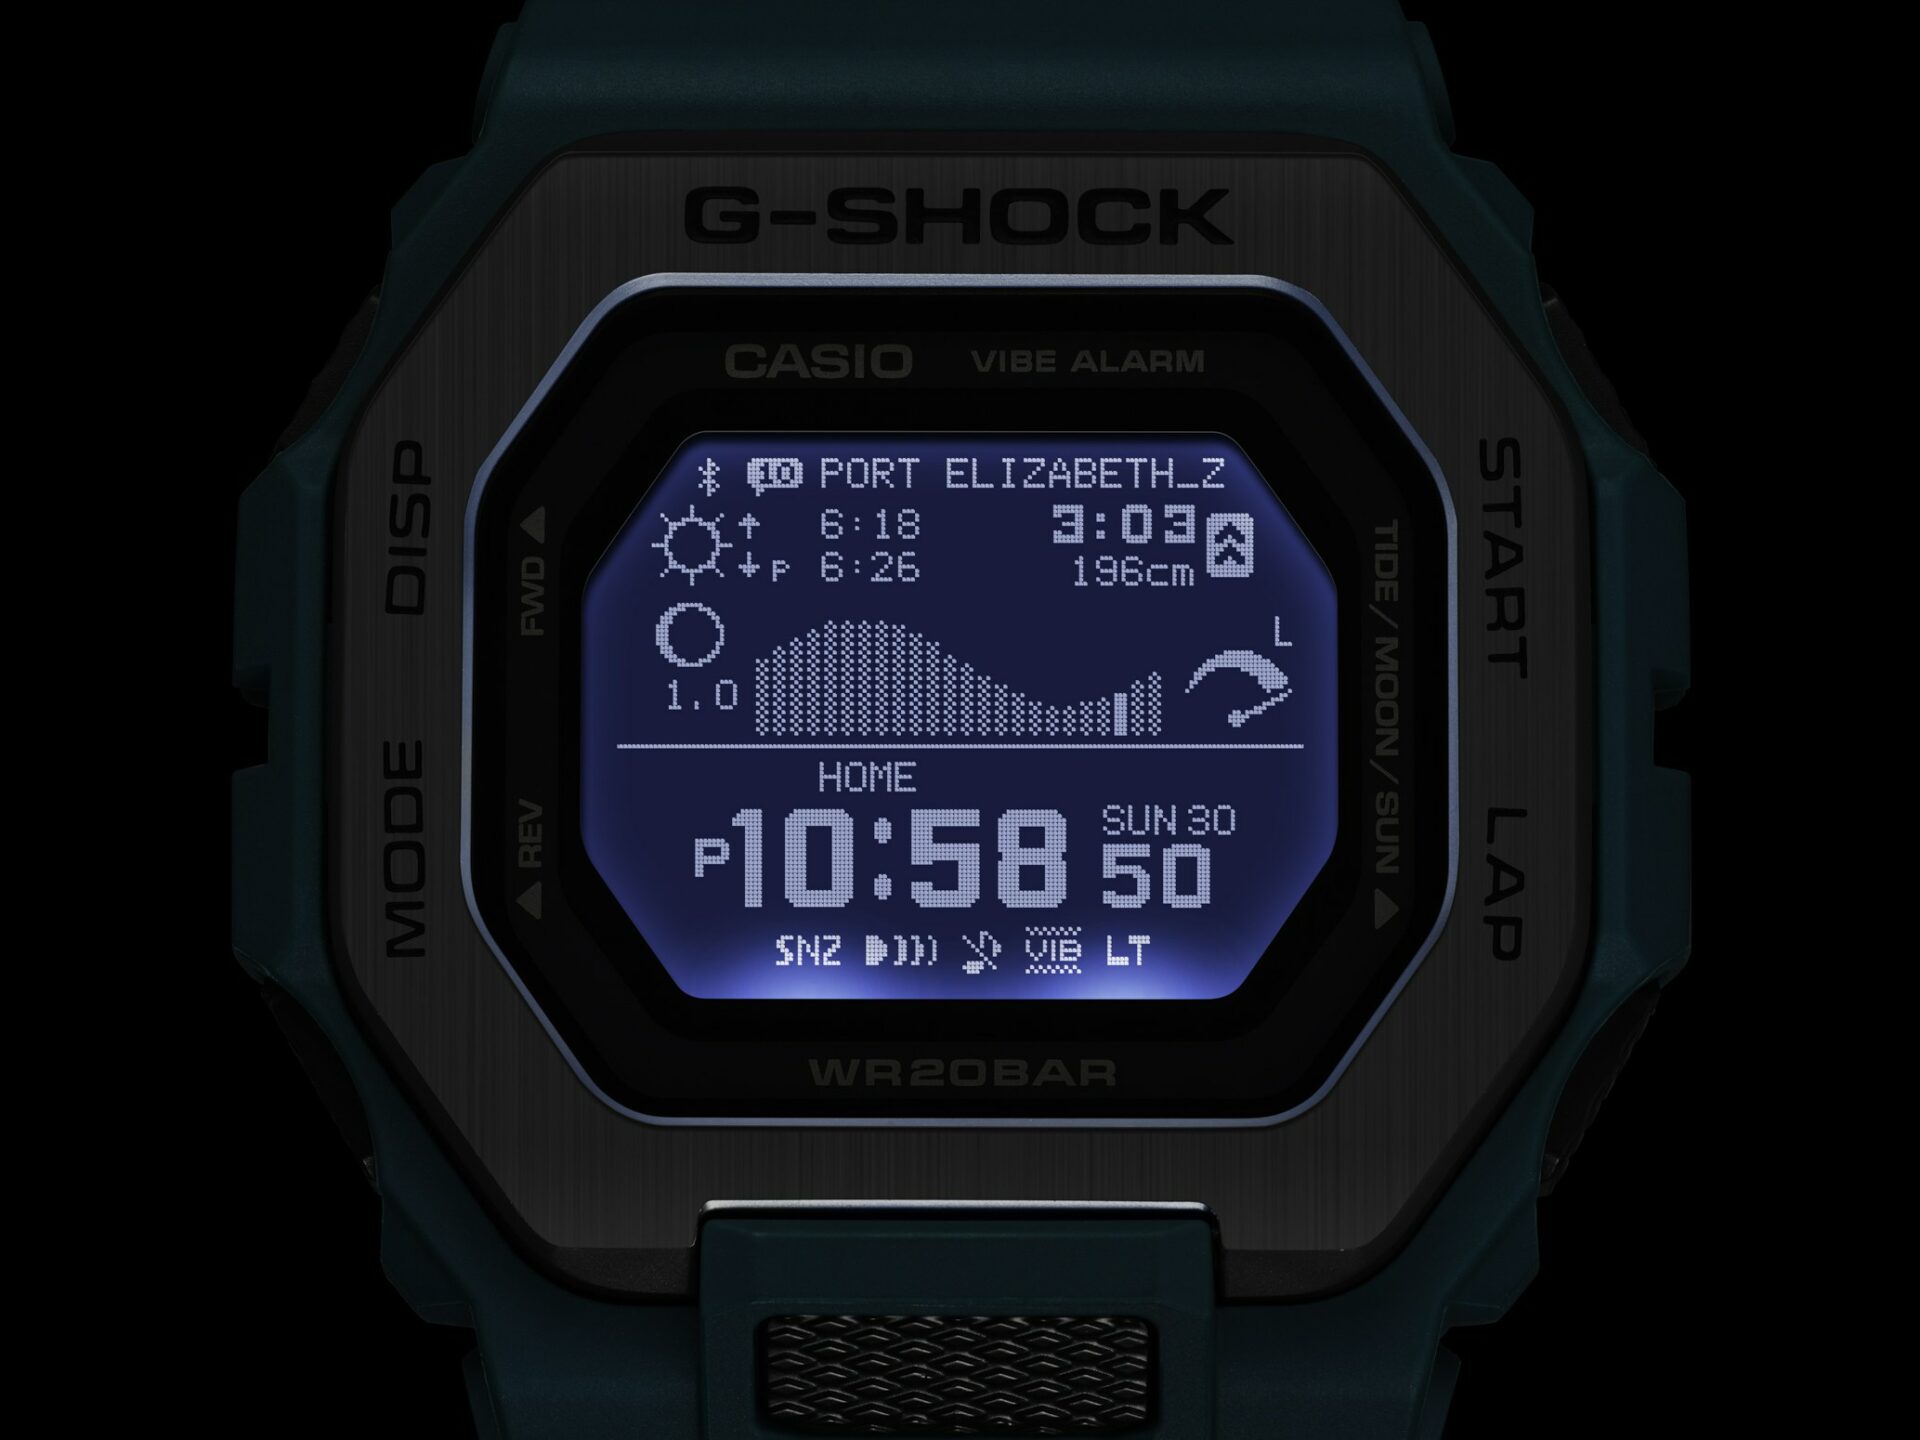 INTRODUCING: The G-Shock G-LIDE tells both time and tide, surfers rejoice